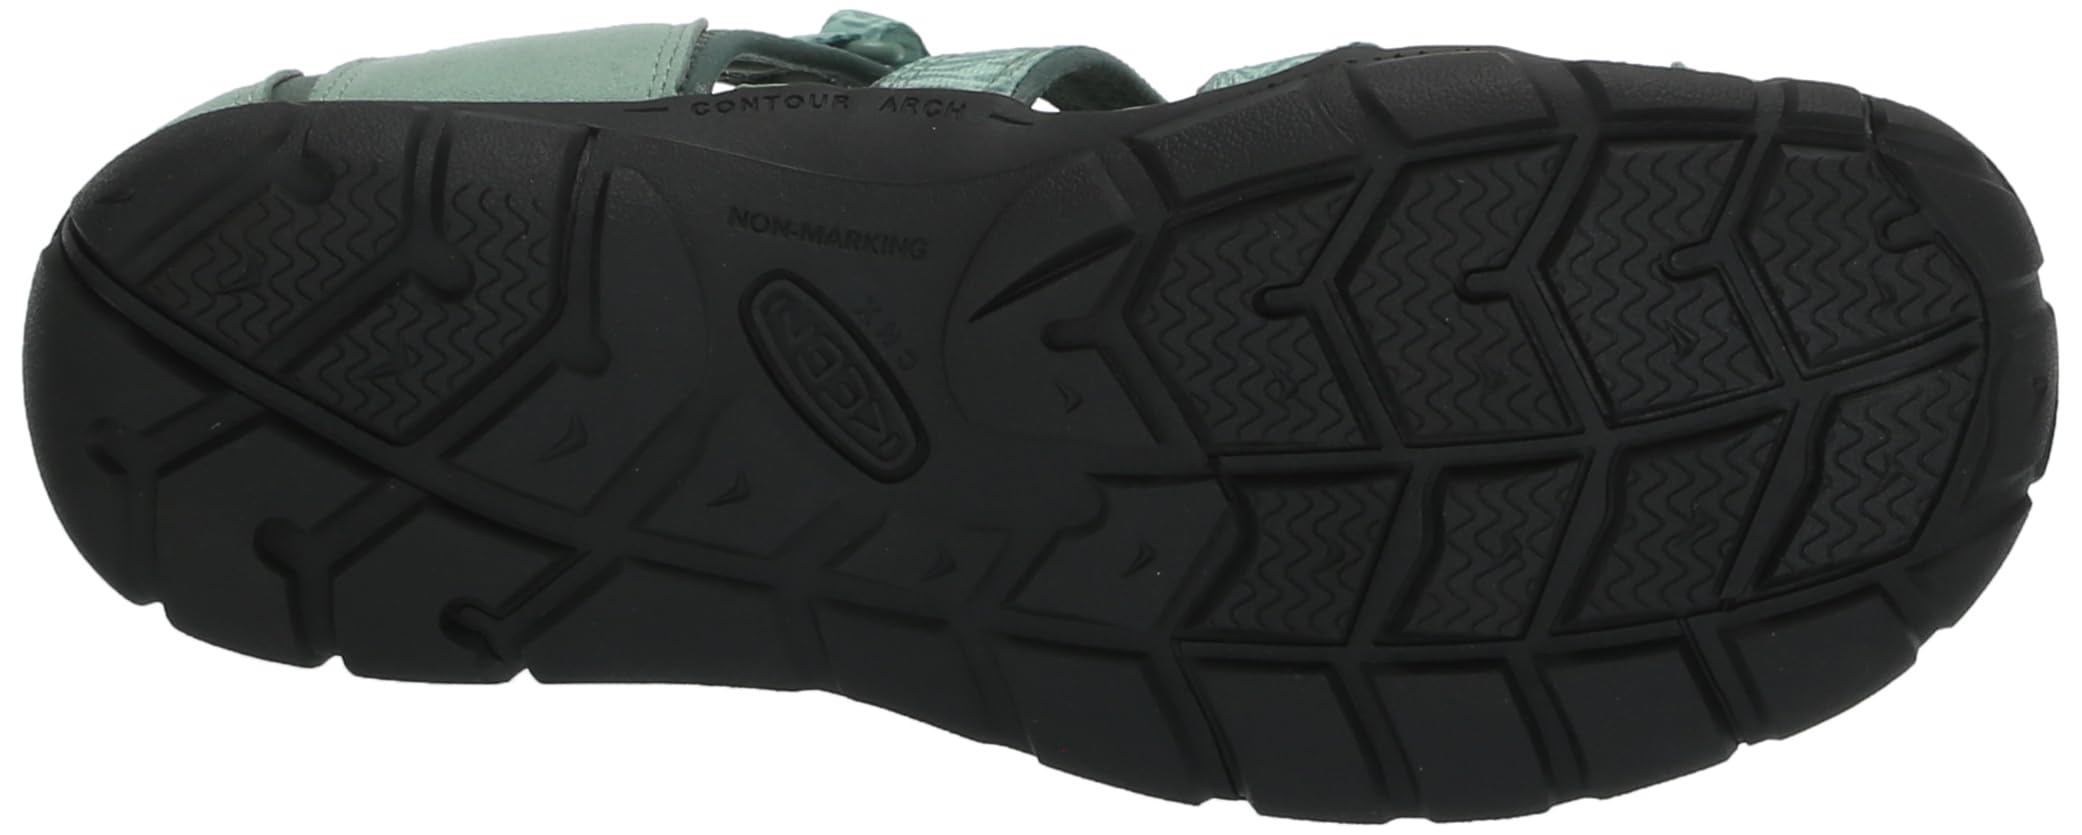 KEEN Kids Seacamp 2 CNX Closed Toe Sandals, Granite Green/Cayenne, 7 US Unisex Toddler